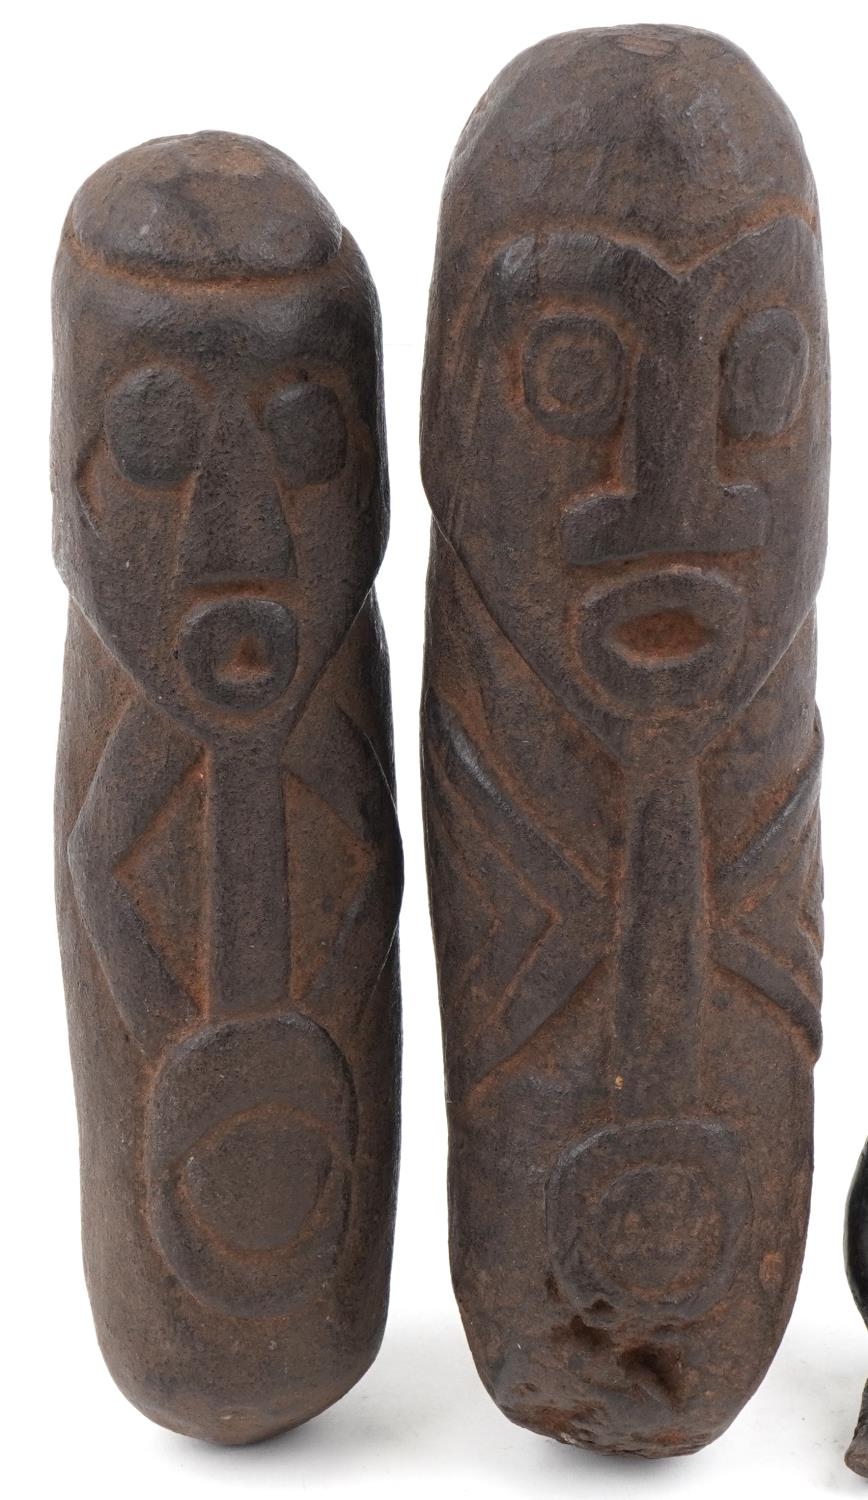 Native American Pre Columbian artefacts including two phallus figures, the largest 26.5cm in length - Image 2 of 5